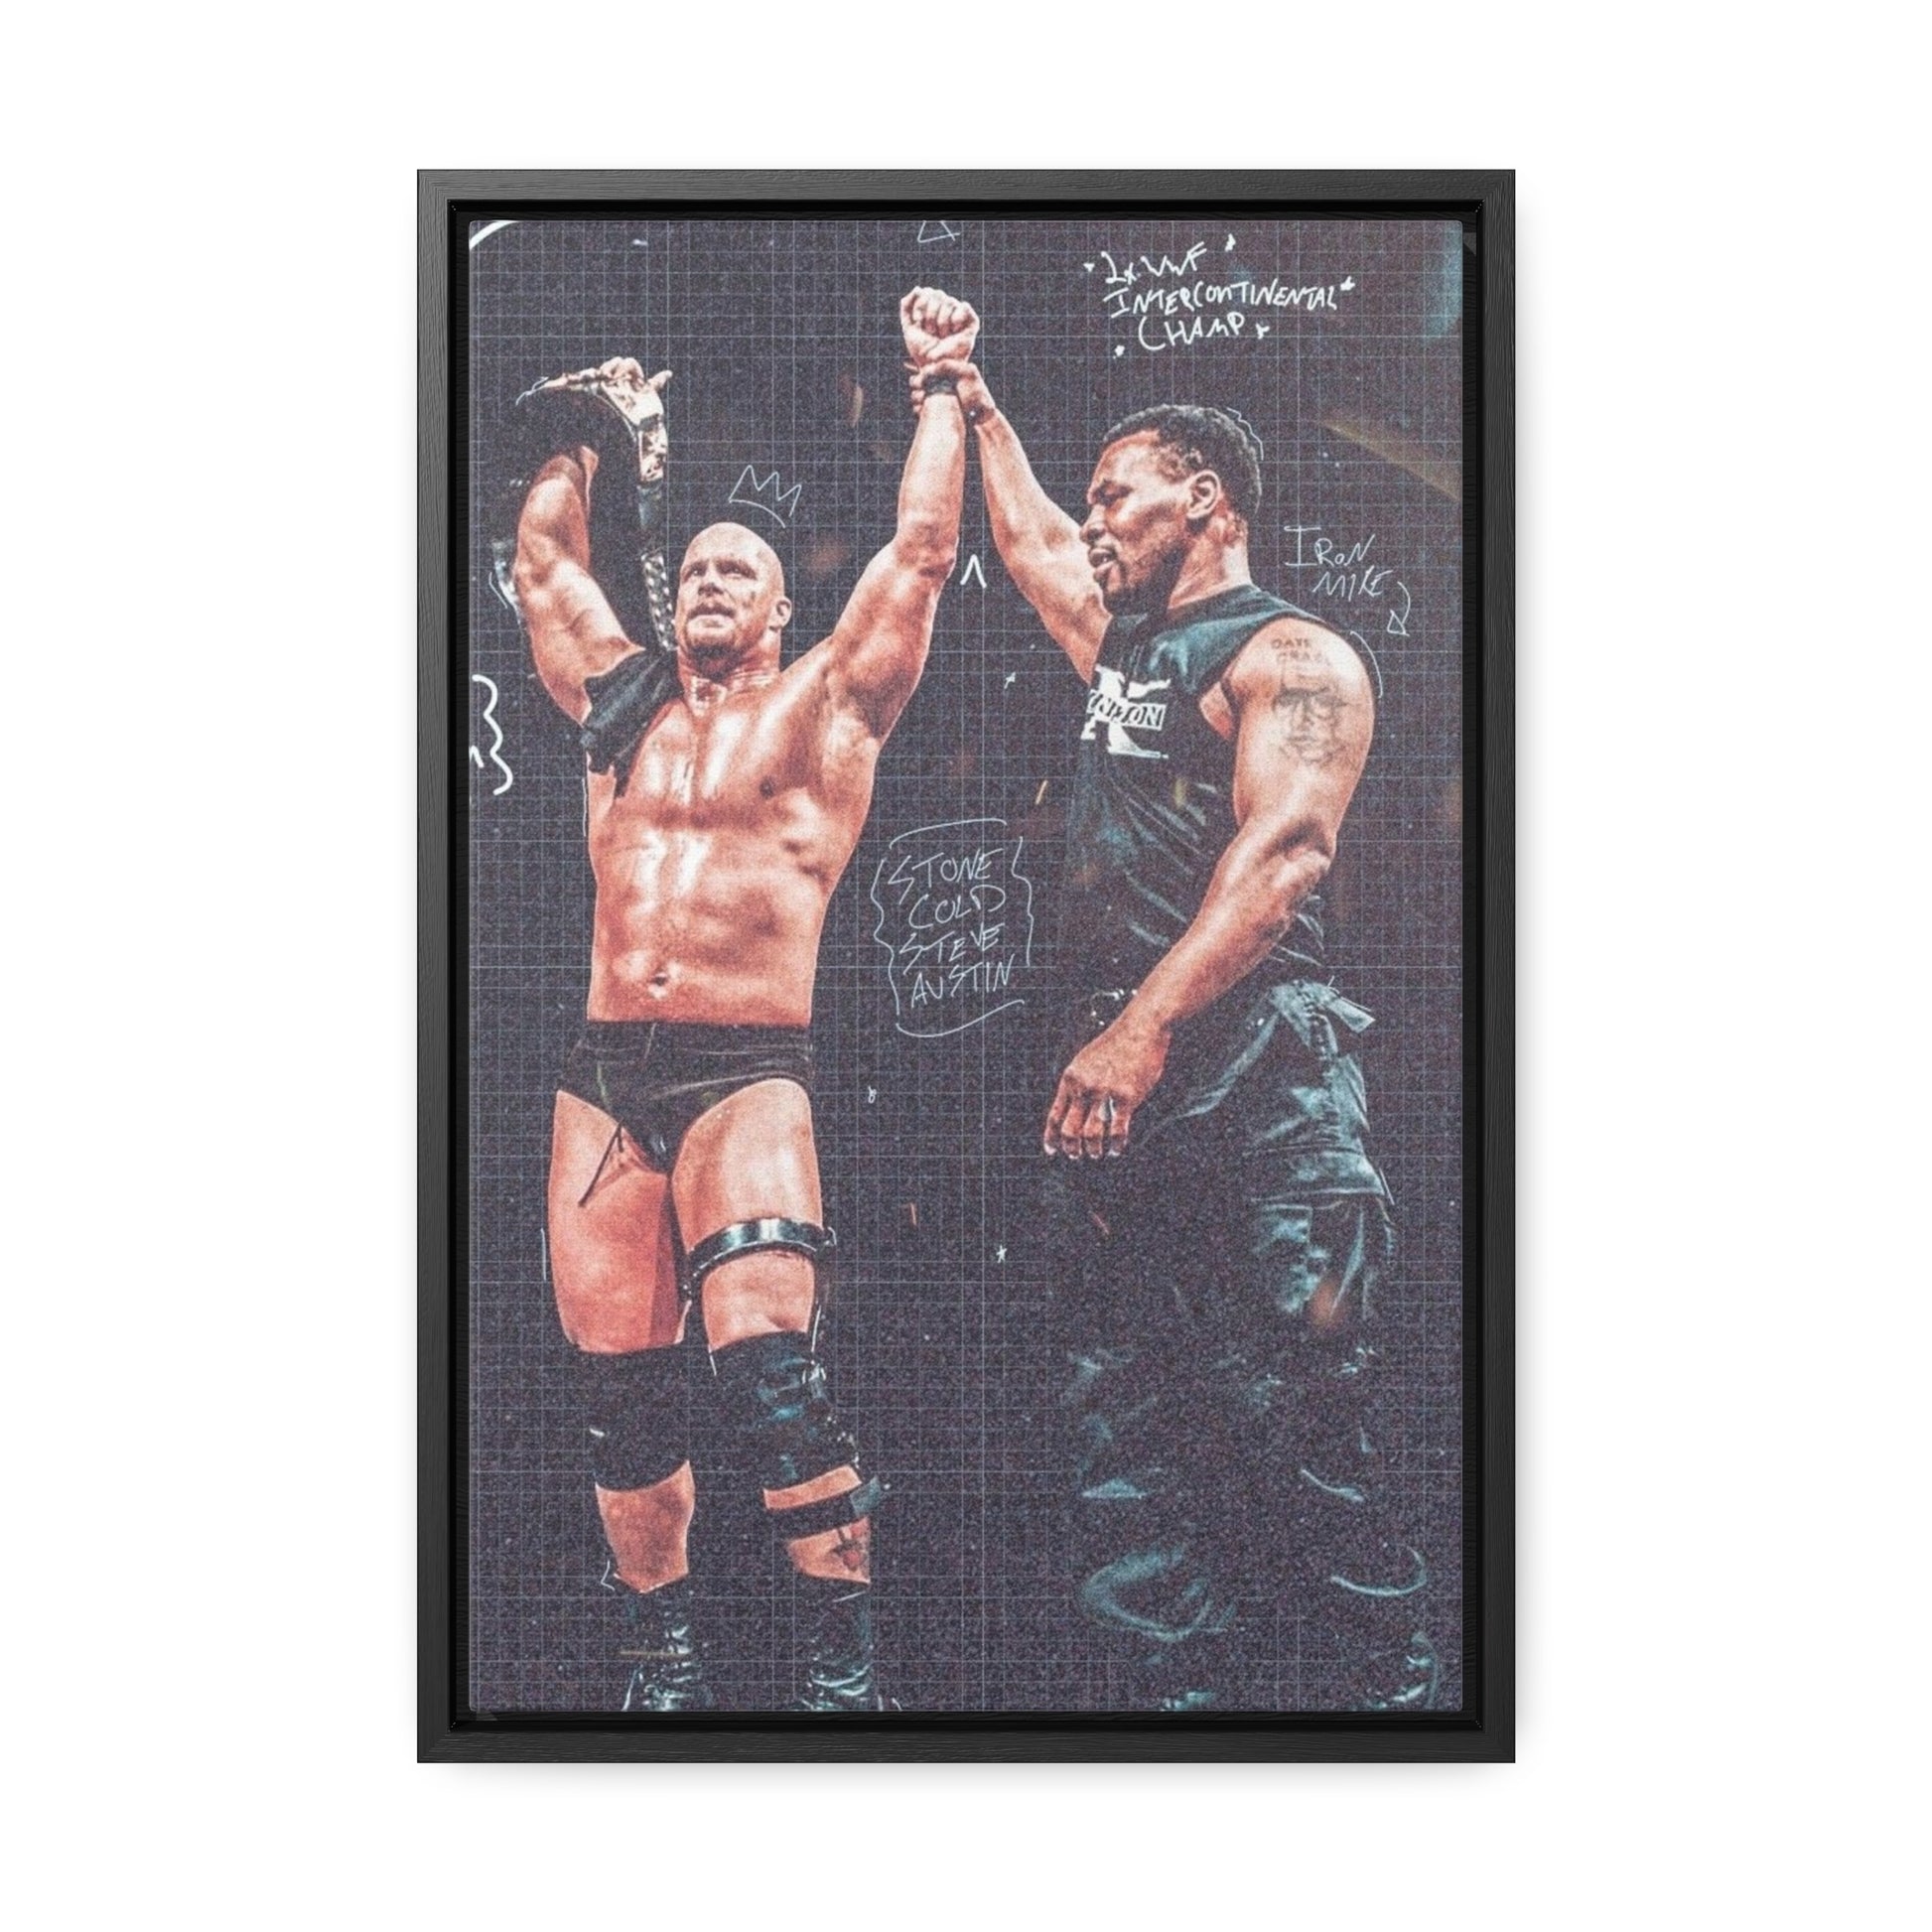 Gallery Canvas Wraps, Vertical Frame Stone cold Mike Tyson